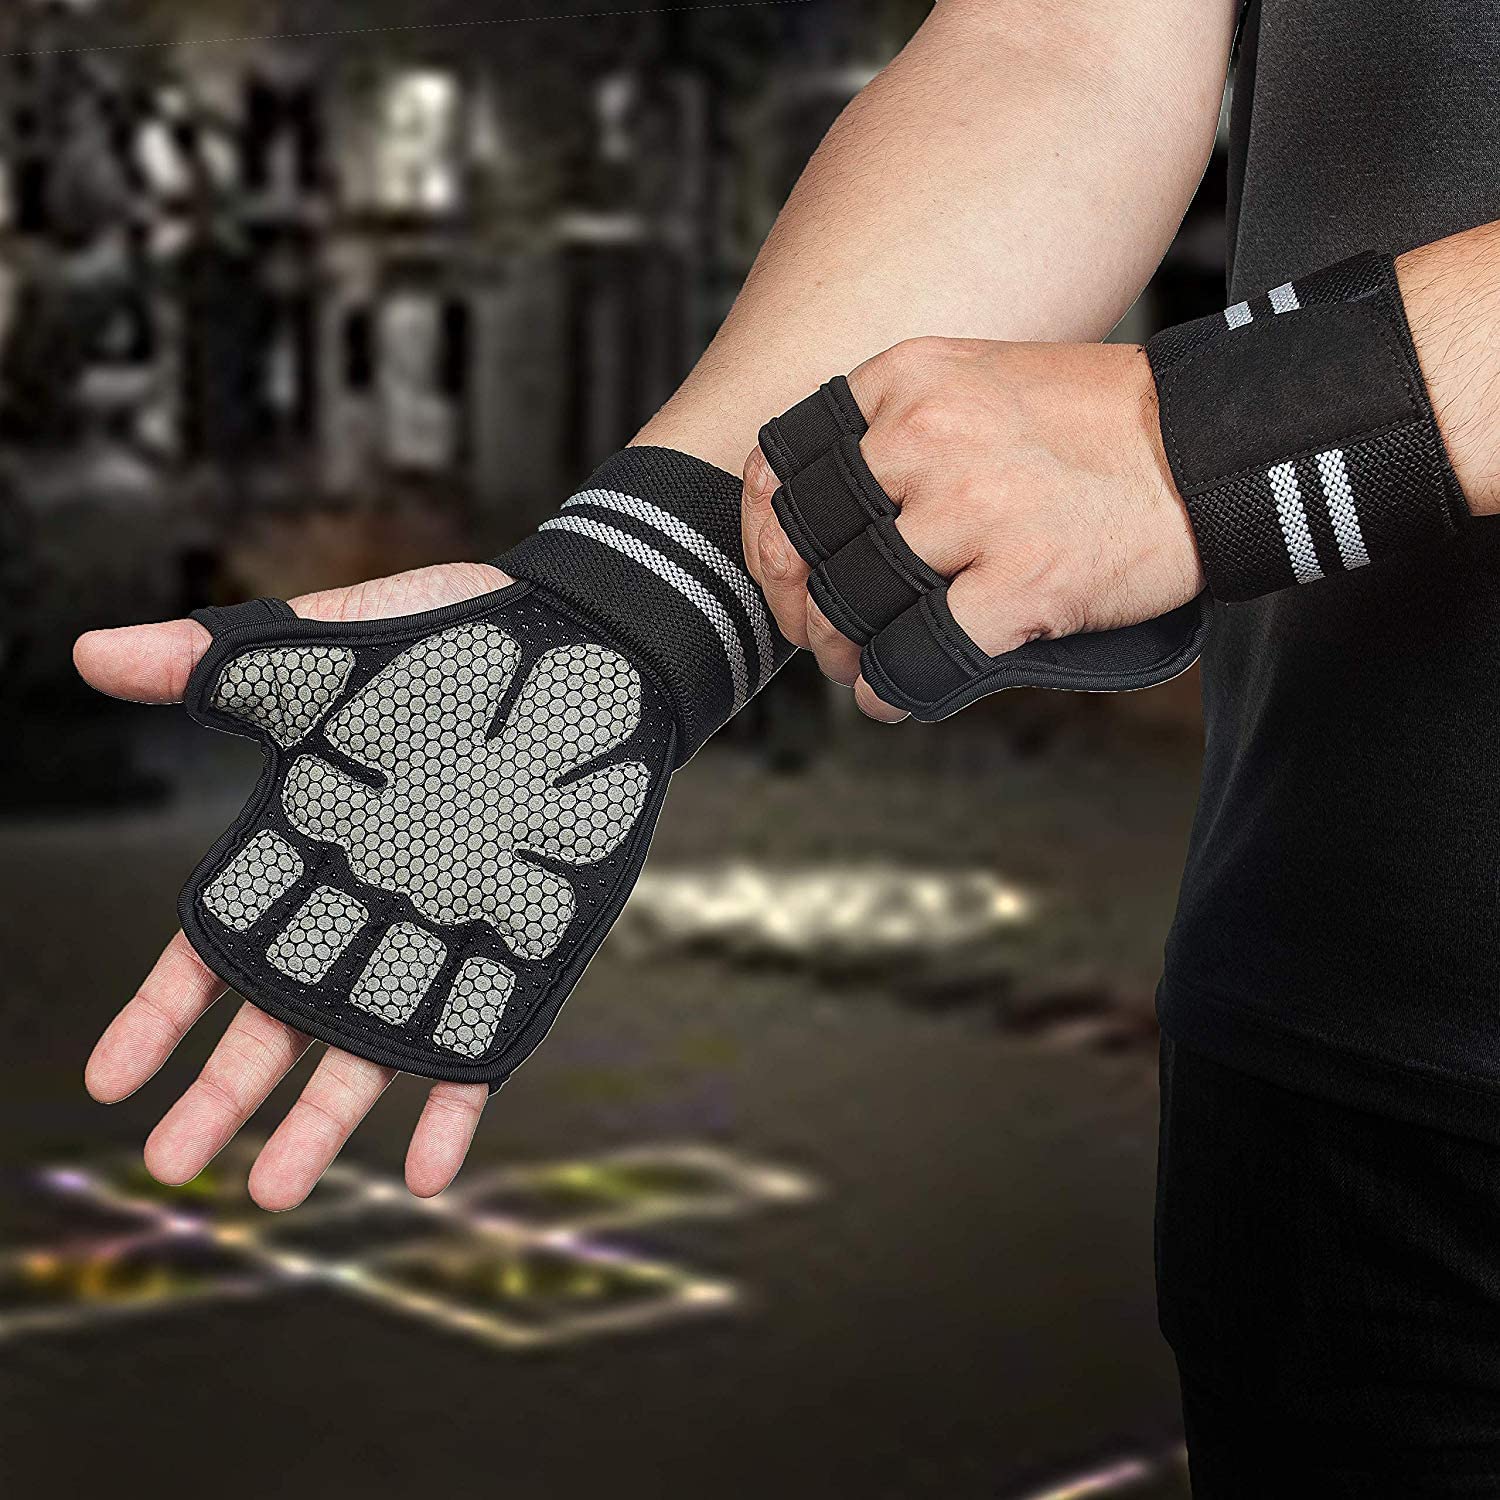 Gym Gloves for Weight Lifting Crossfit Fitness Workout Exercise Hand G